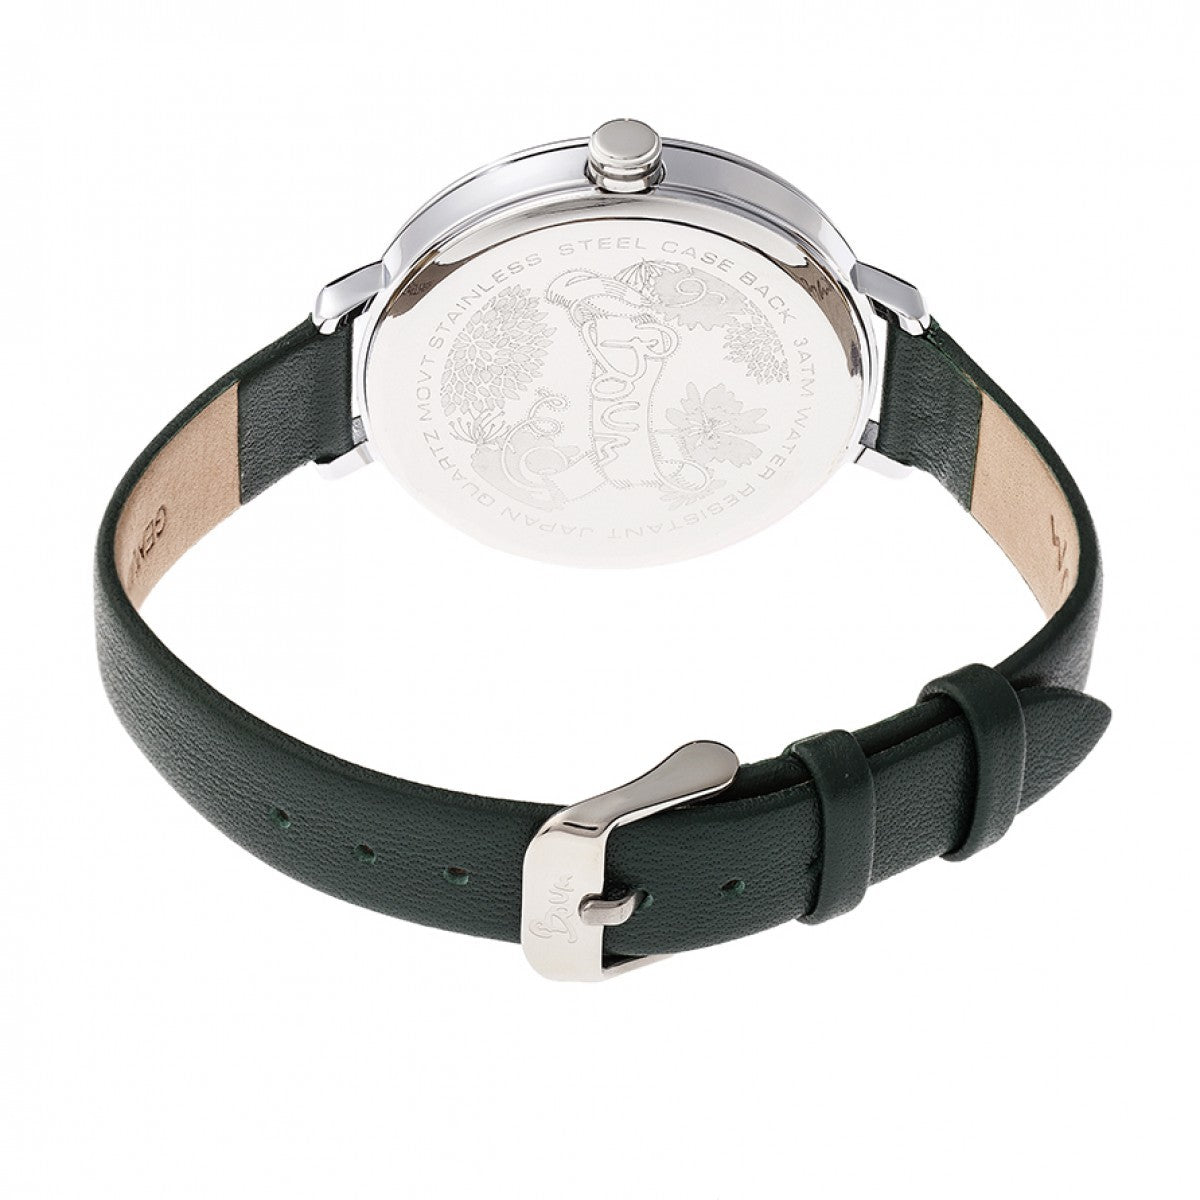 Boum Perle Leather-Band Watch - Silver/Green - BOUBM5103